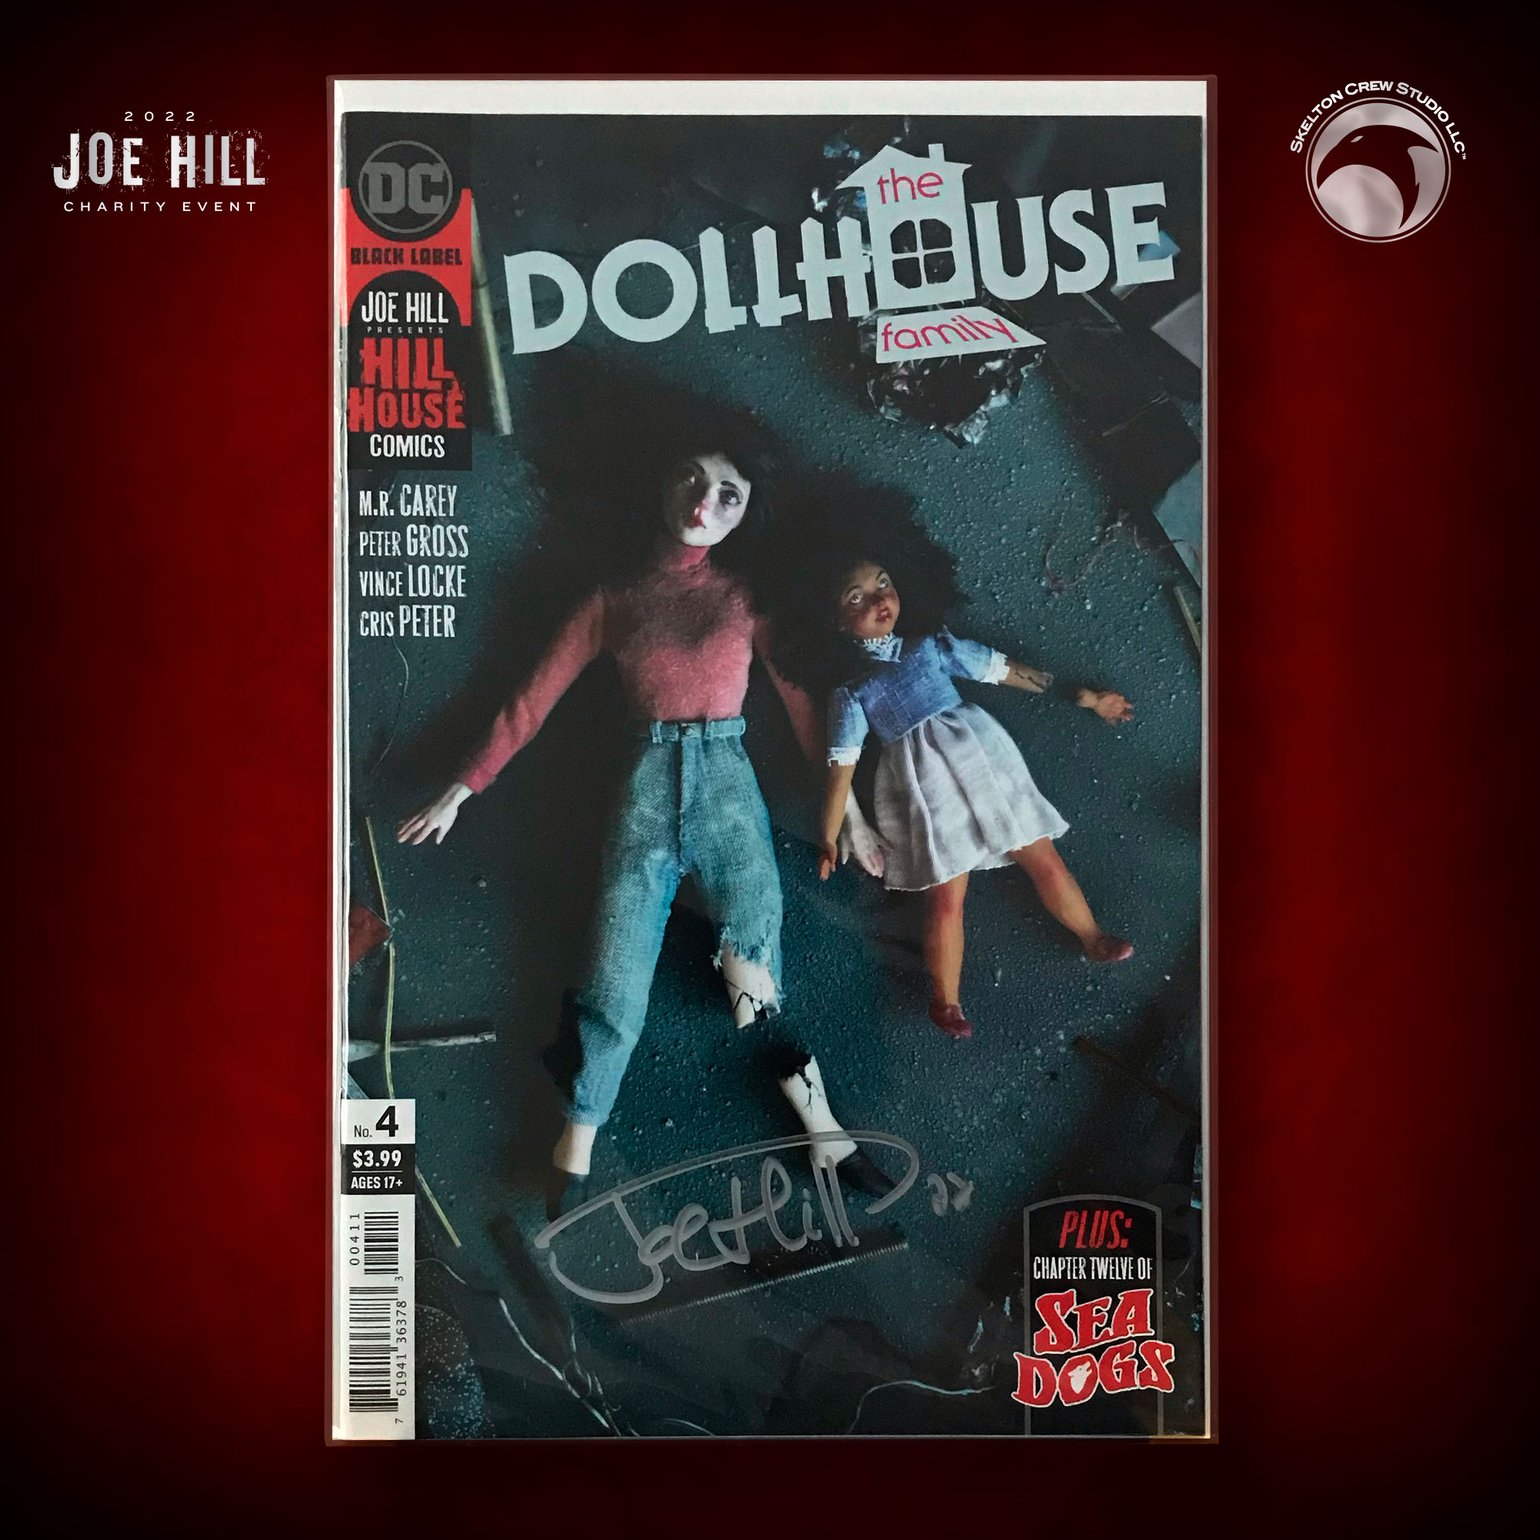 Image of JOE HILL 2022 CHARITY EVENT 33: SIGNED "The Dollhouse Family" #4